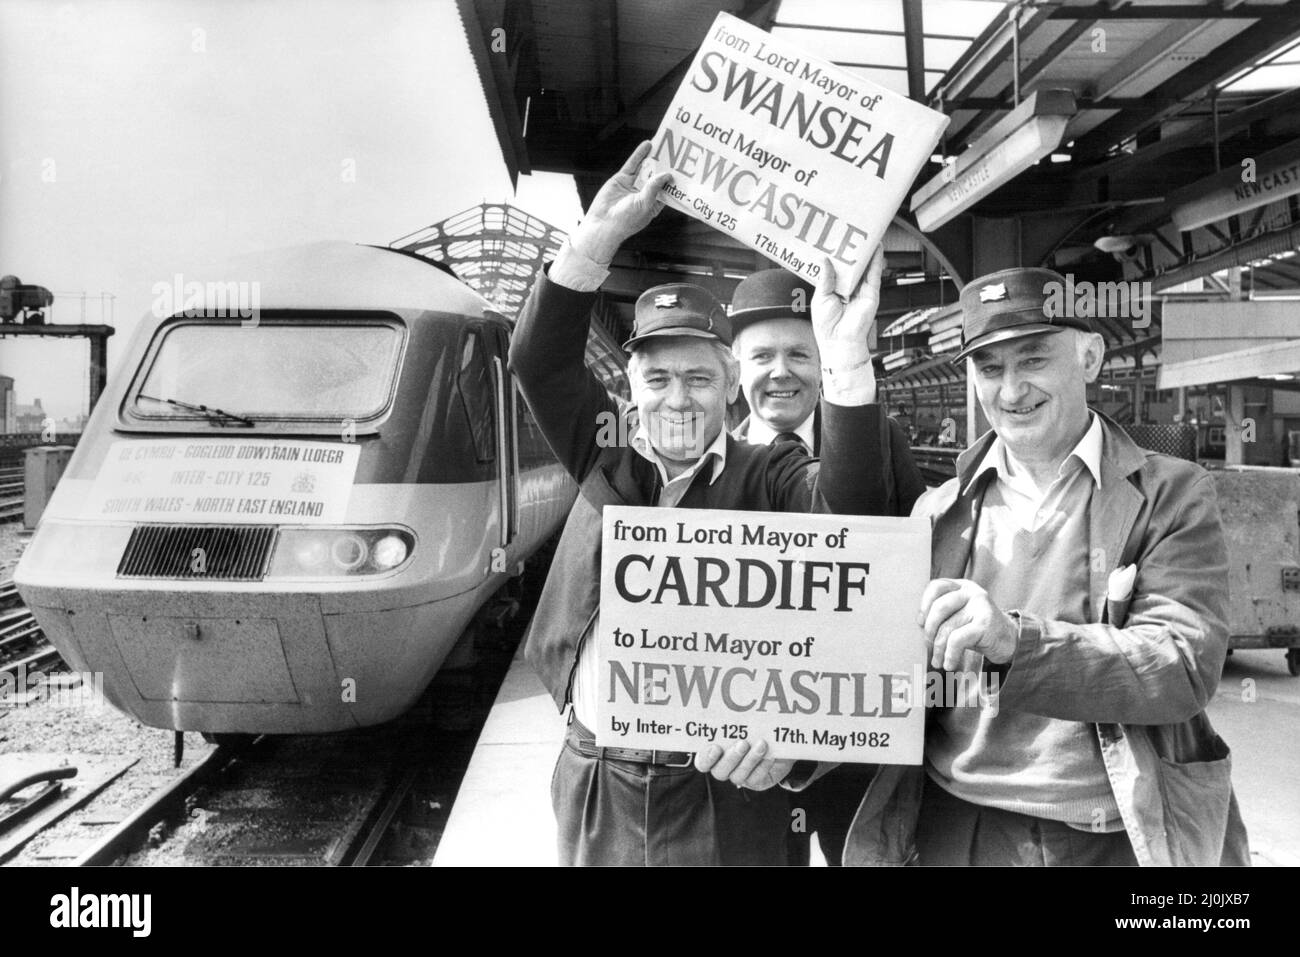 Train drivers Bic Bryant and Norman Boyd (right), with station manager Neil Clarke at Newcastle Central Staton on 17th March 1982.  The drivers went into the record books when they drove the Ifirst nter-City 125 High Speed train to connect the North East with Wales and the South West. Stock Photo